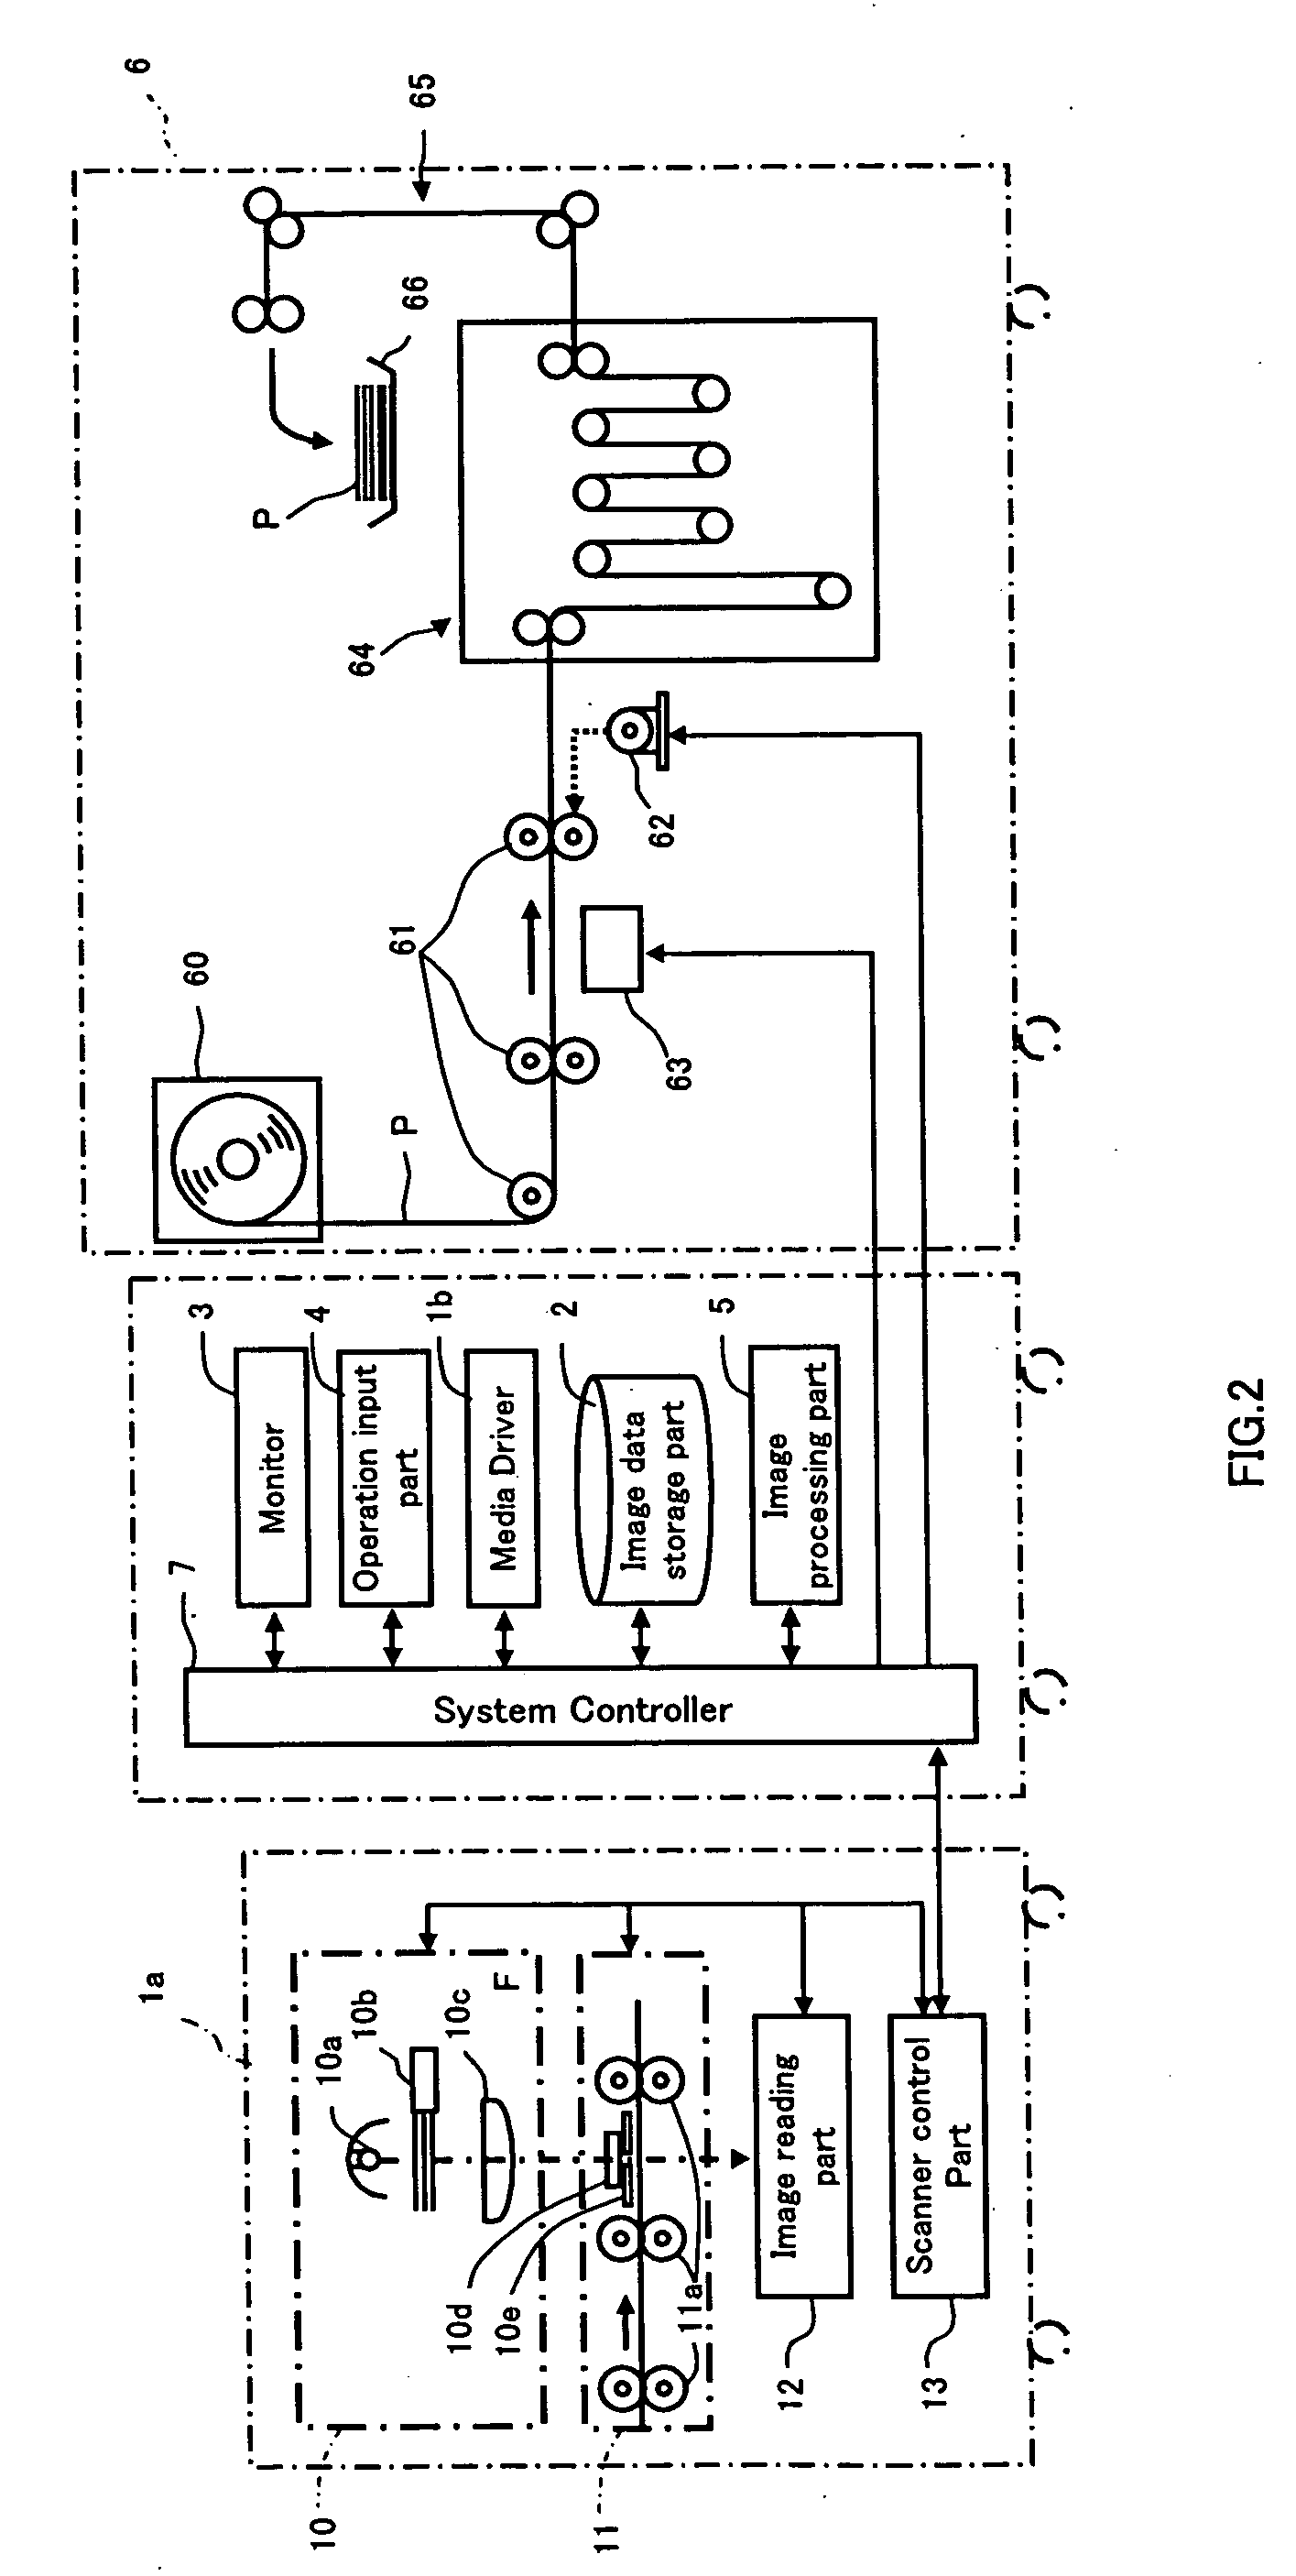 Photographic image processing method and equipment